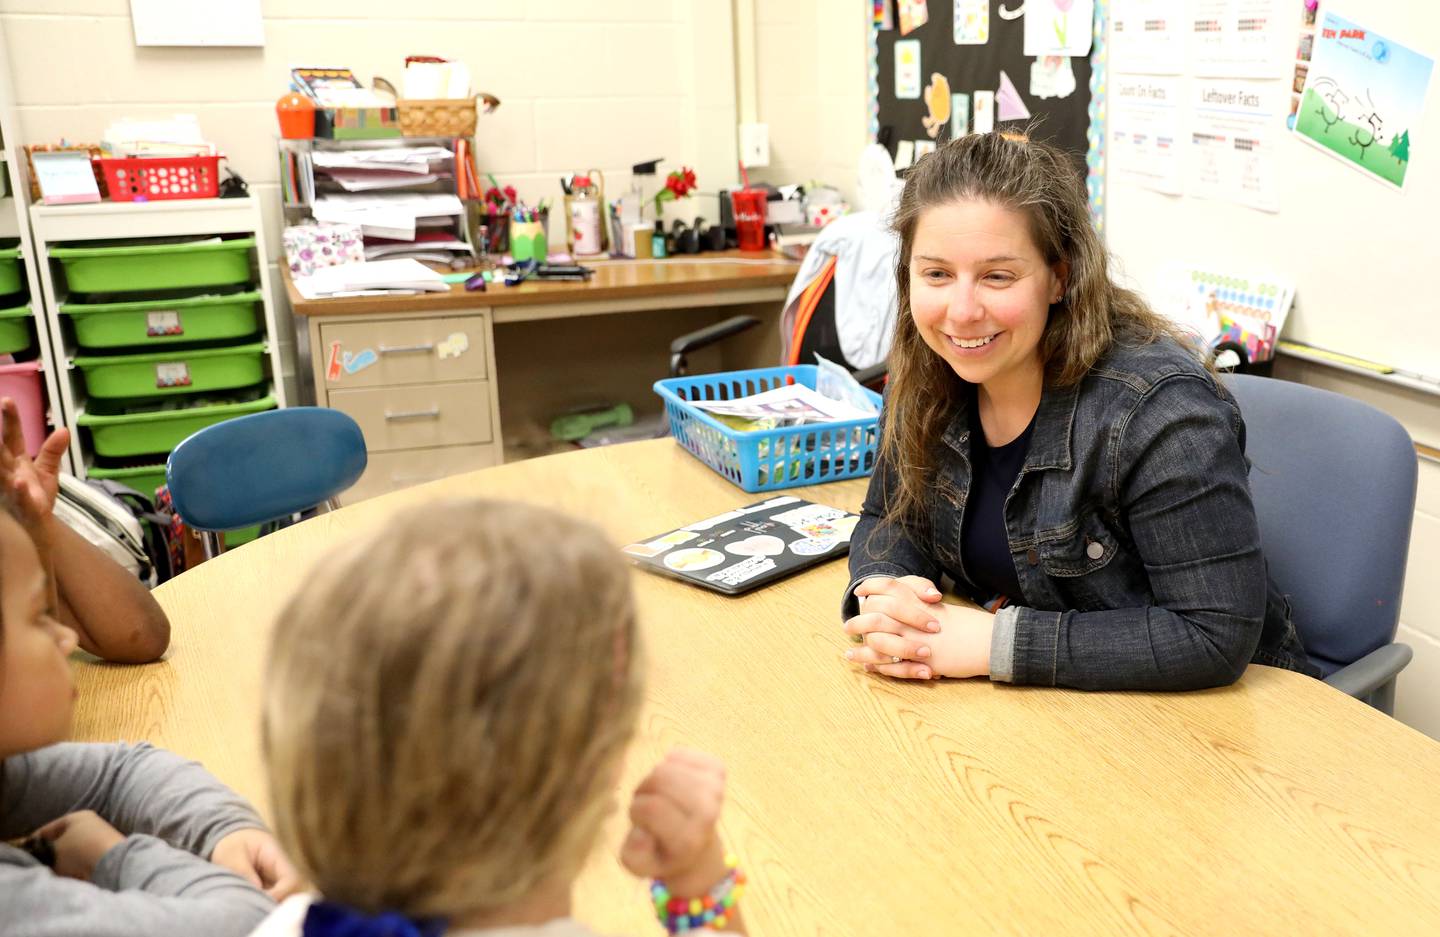 Indian Trail Elementary School interventionist Katie Hurckes works with some of her first graders at the Downers Grove school.Indian Trail Elementary School interventionist Katie Hurckes works with some of her first graders at the Downers Grove school.